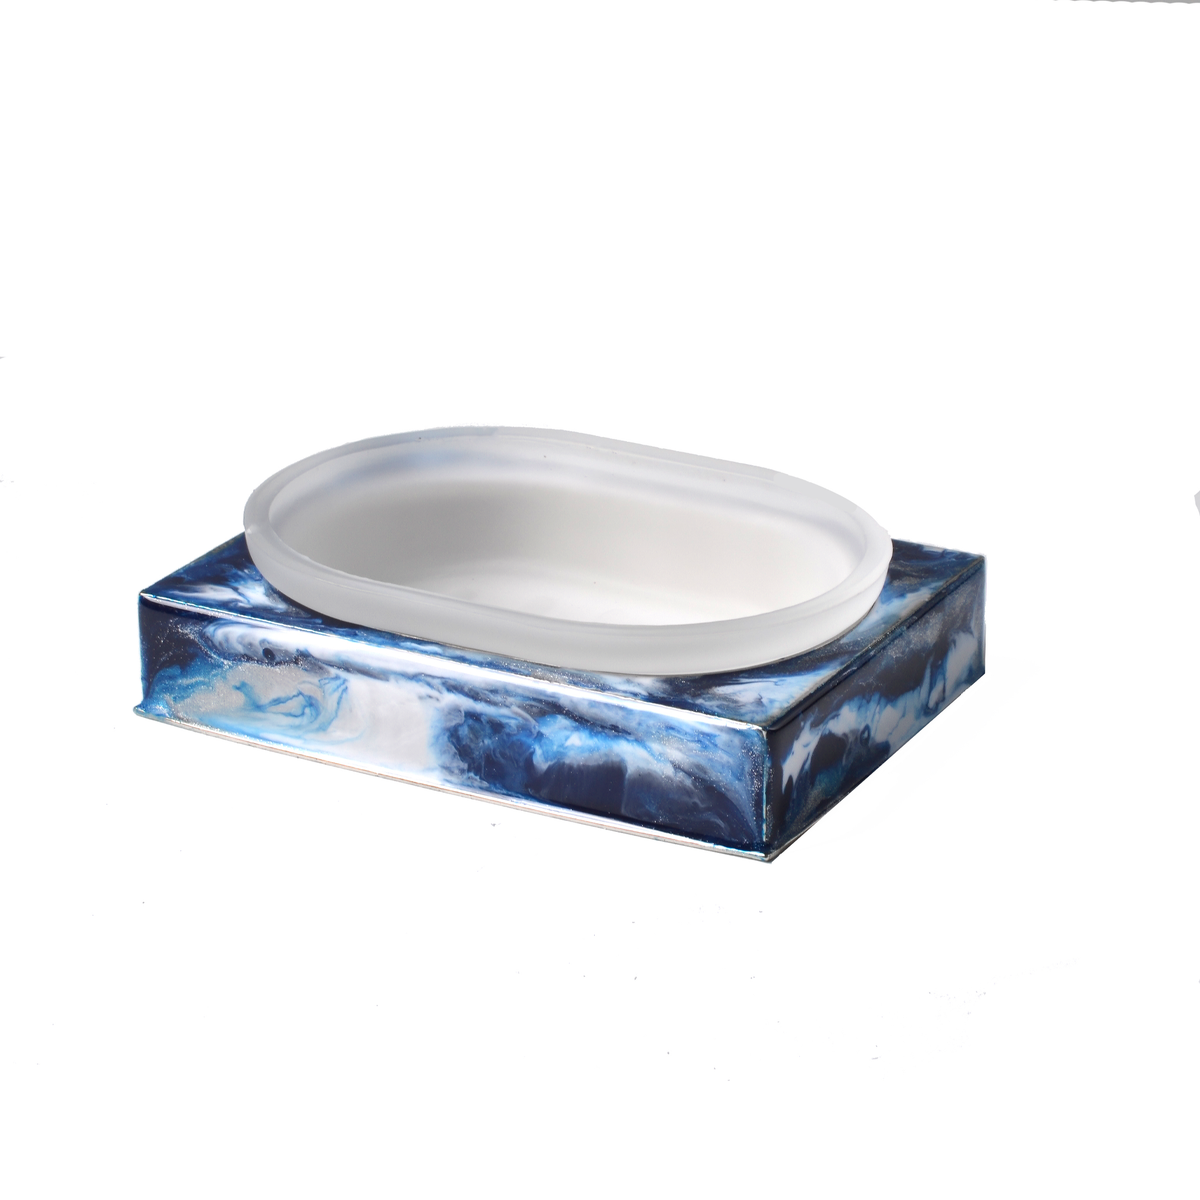 Soap Dish of Mike and Ally Elan Bath Accessories Collectioin in Blue Medley Silver Color